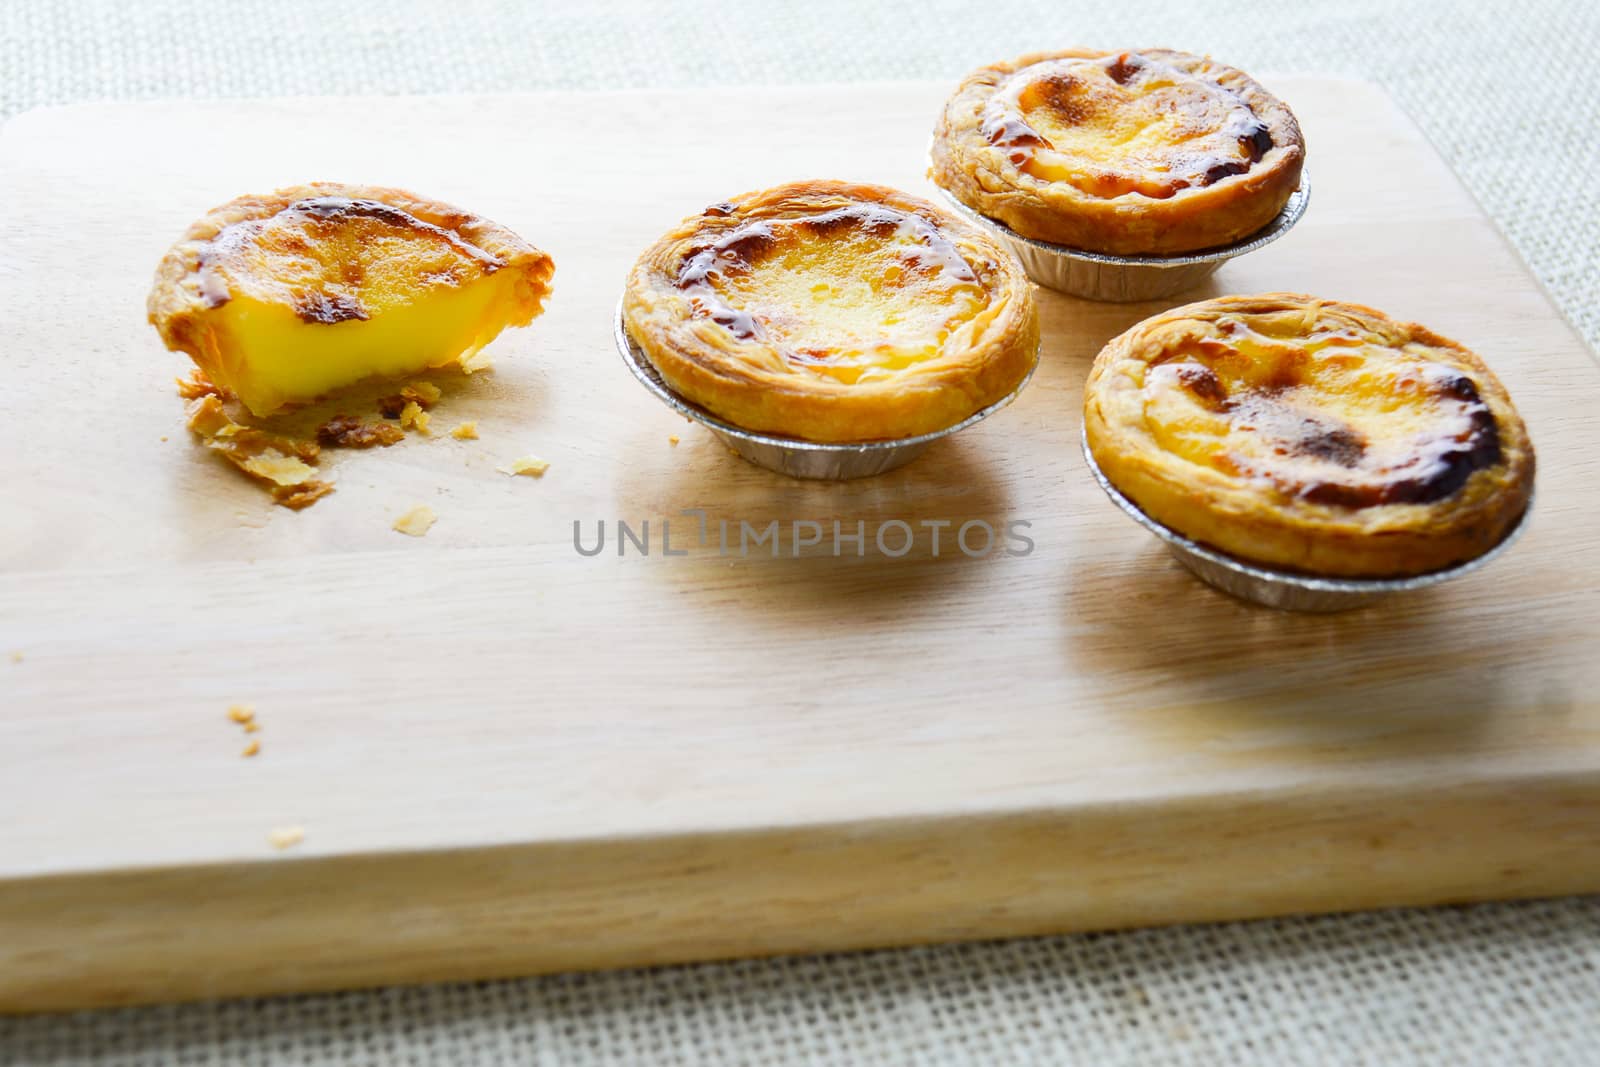 Portuguese Egg Tarts, is a kind of custard tart found in various by yuiyuize